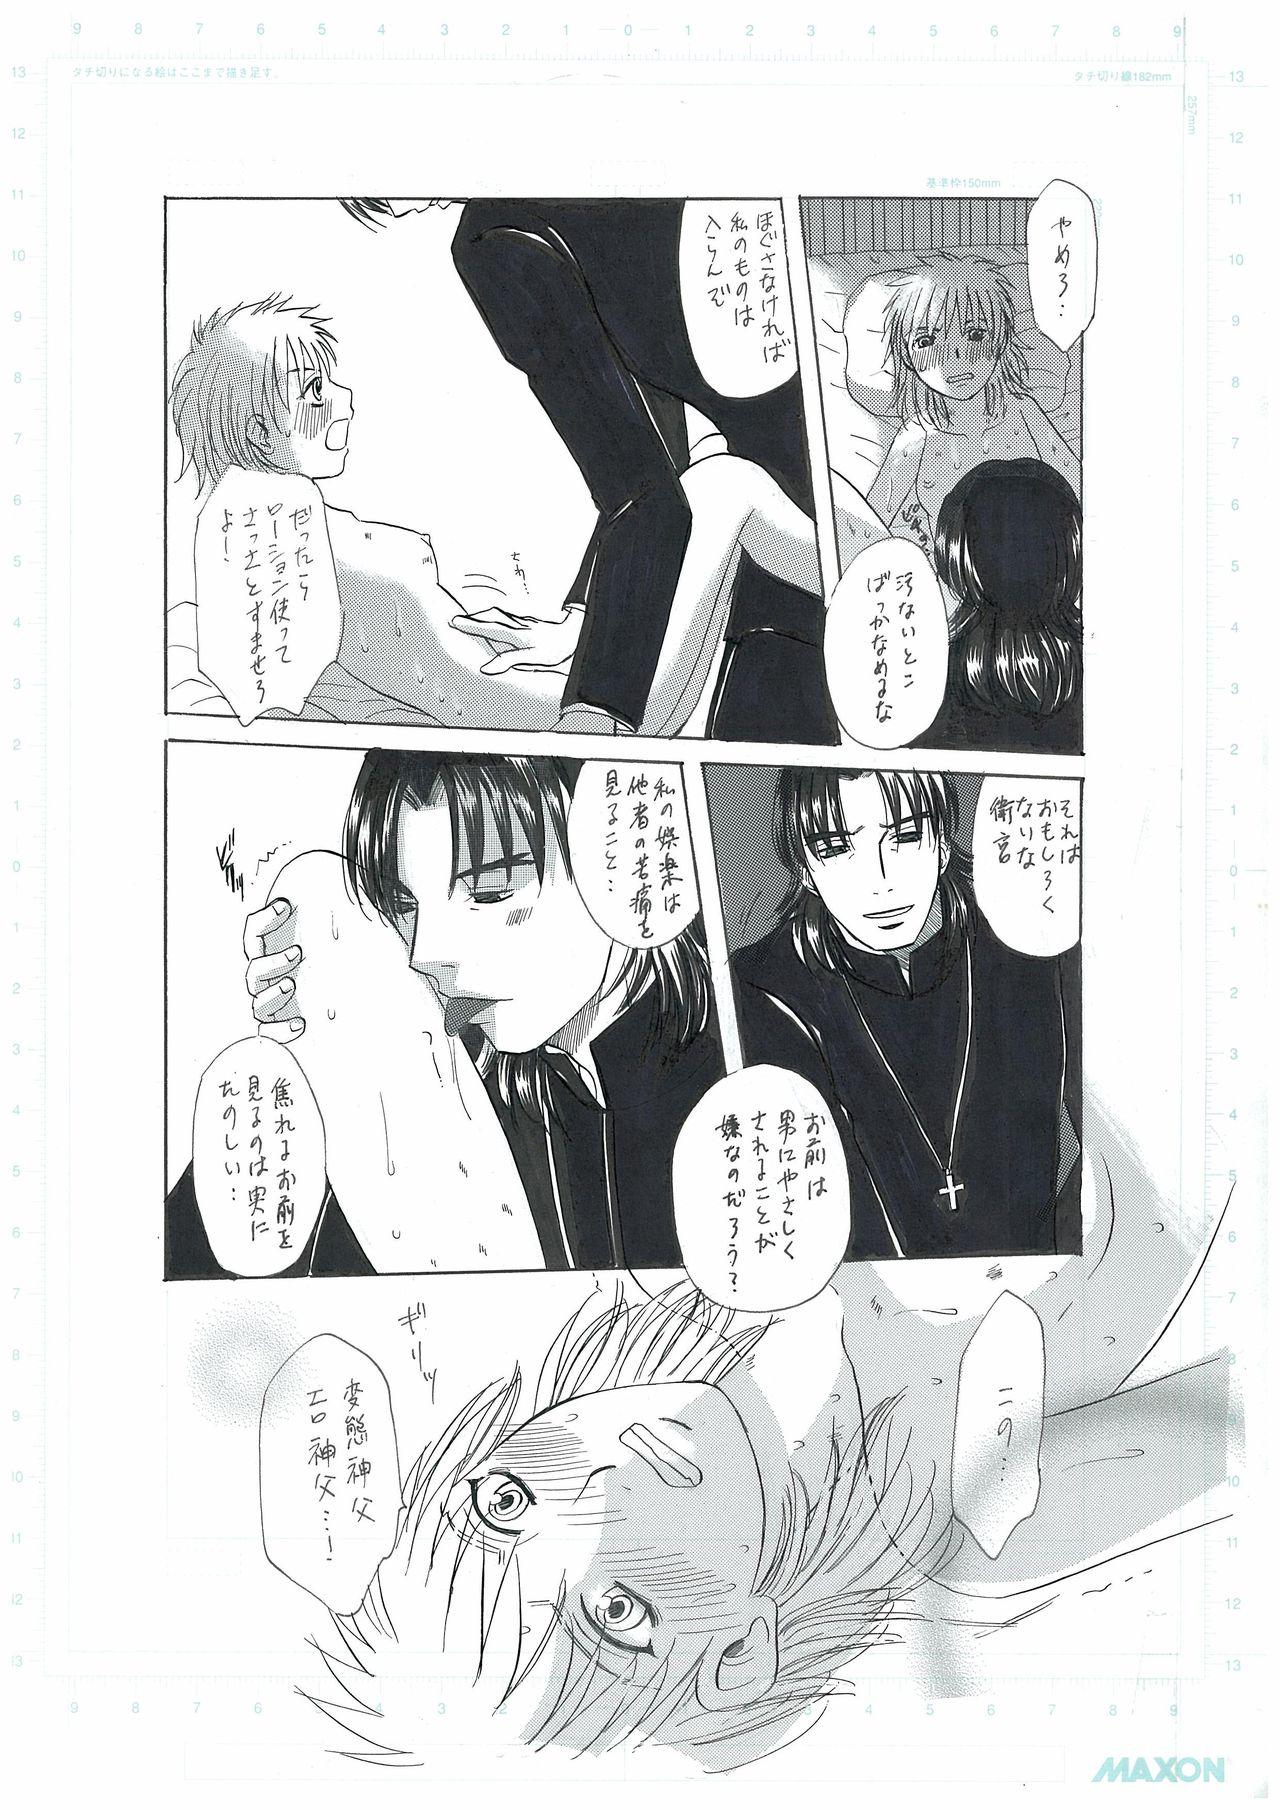 Exhib 彼女の願い - Fate stay night Gaycum - Page 9